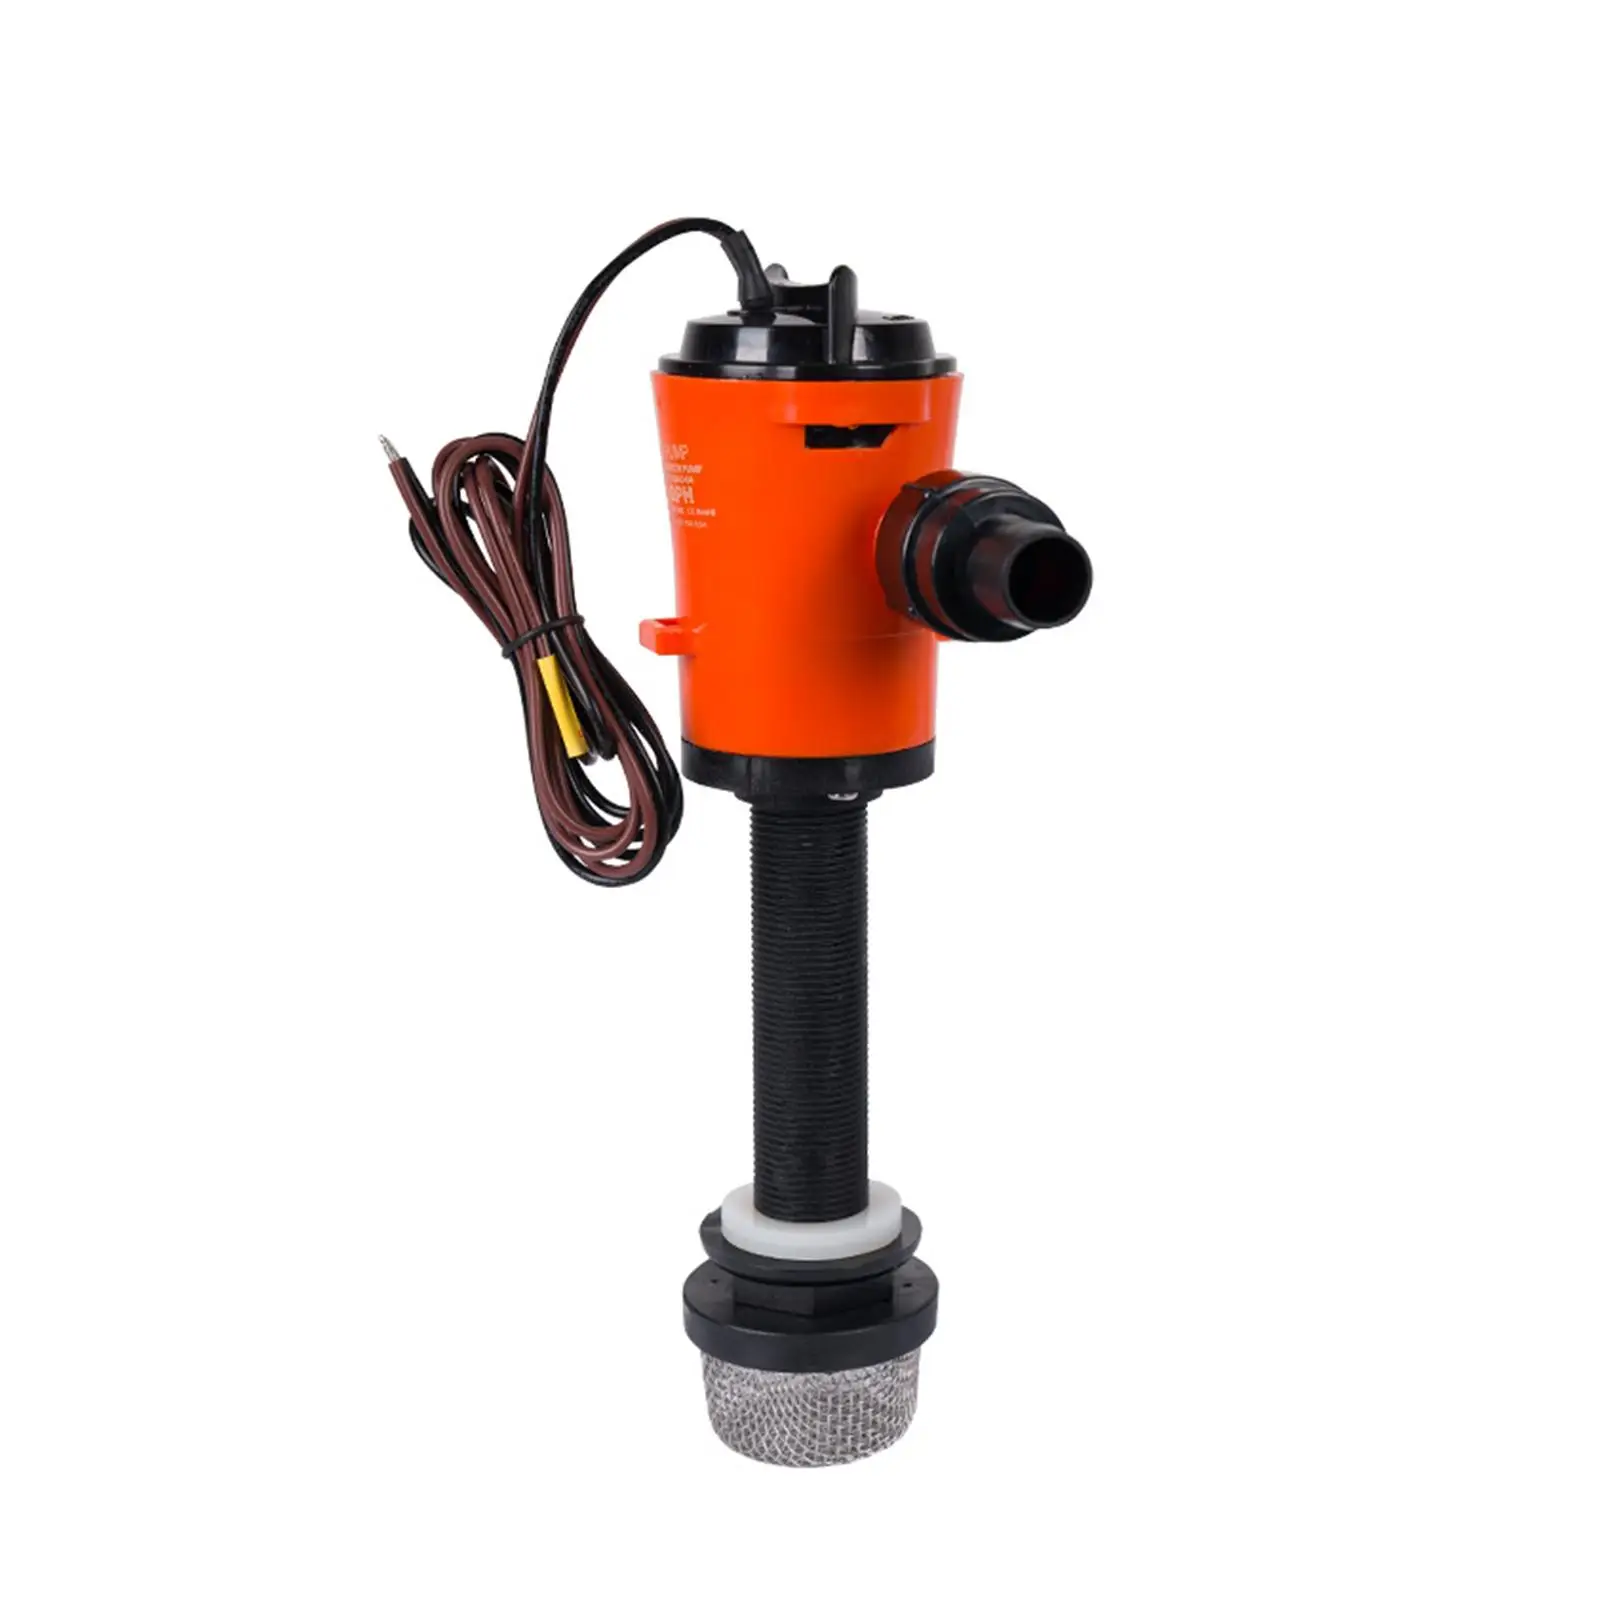 Aerator Livewell Pump Easy to Install Replacement Durable Boat Tools Professional with Filter Boat Aerator Pump 24V 800GPH